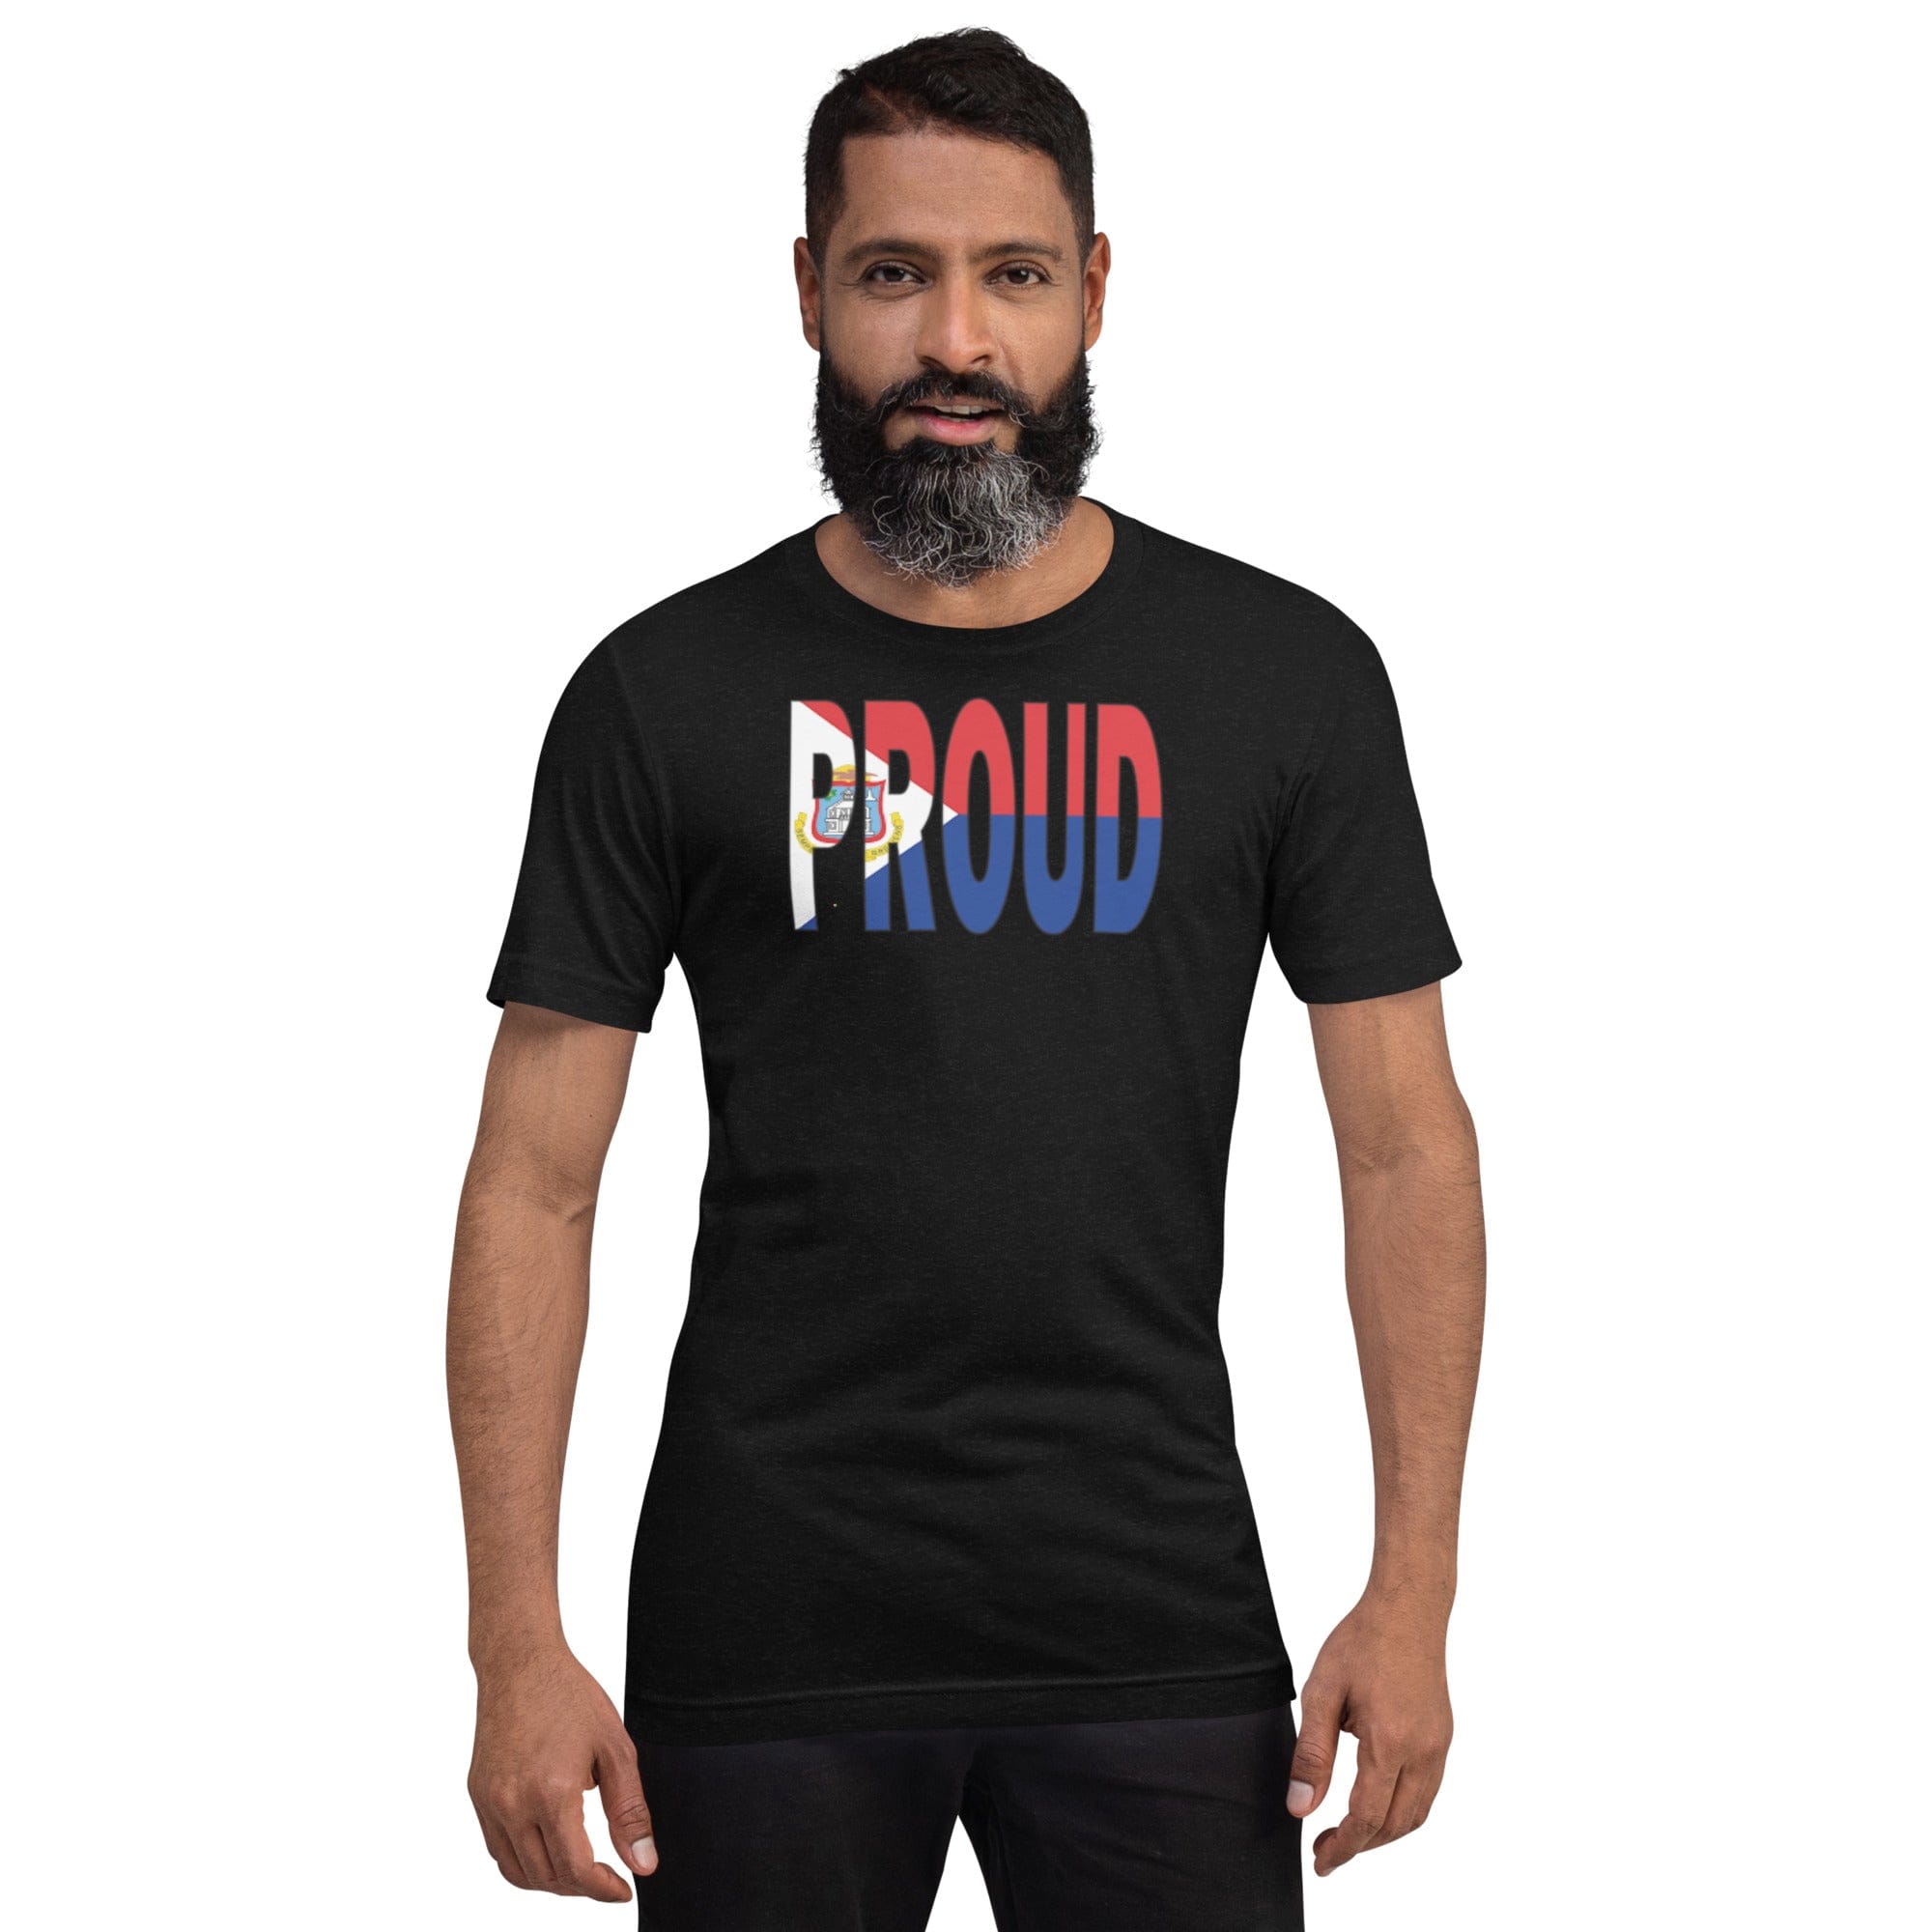 St. Maarten Flag designed to spell Proud on a black color t-shirt worn by a black man.